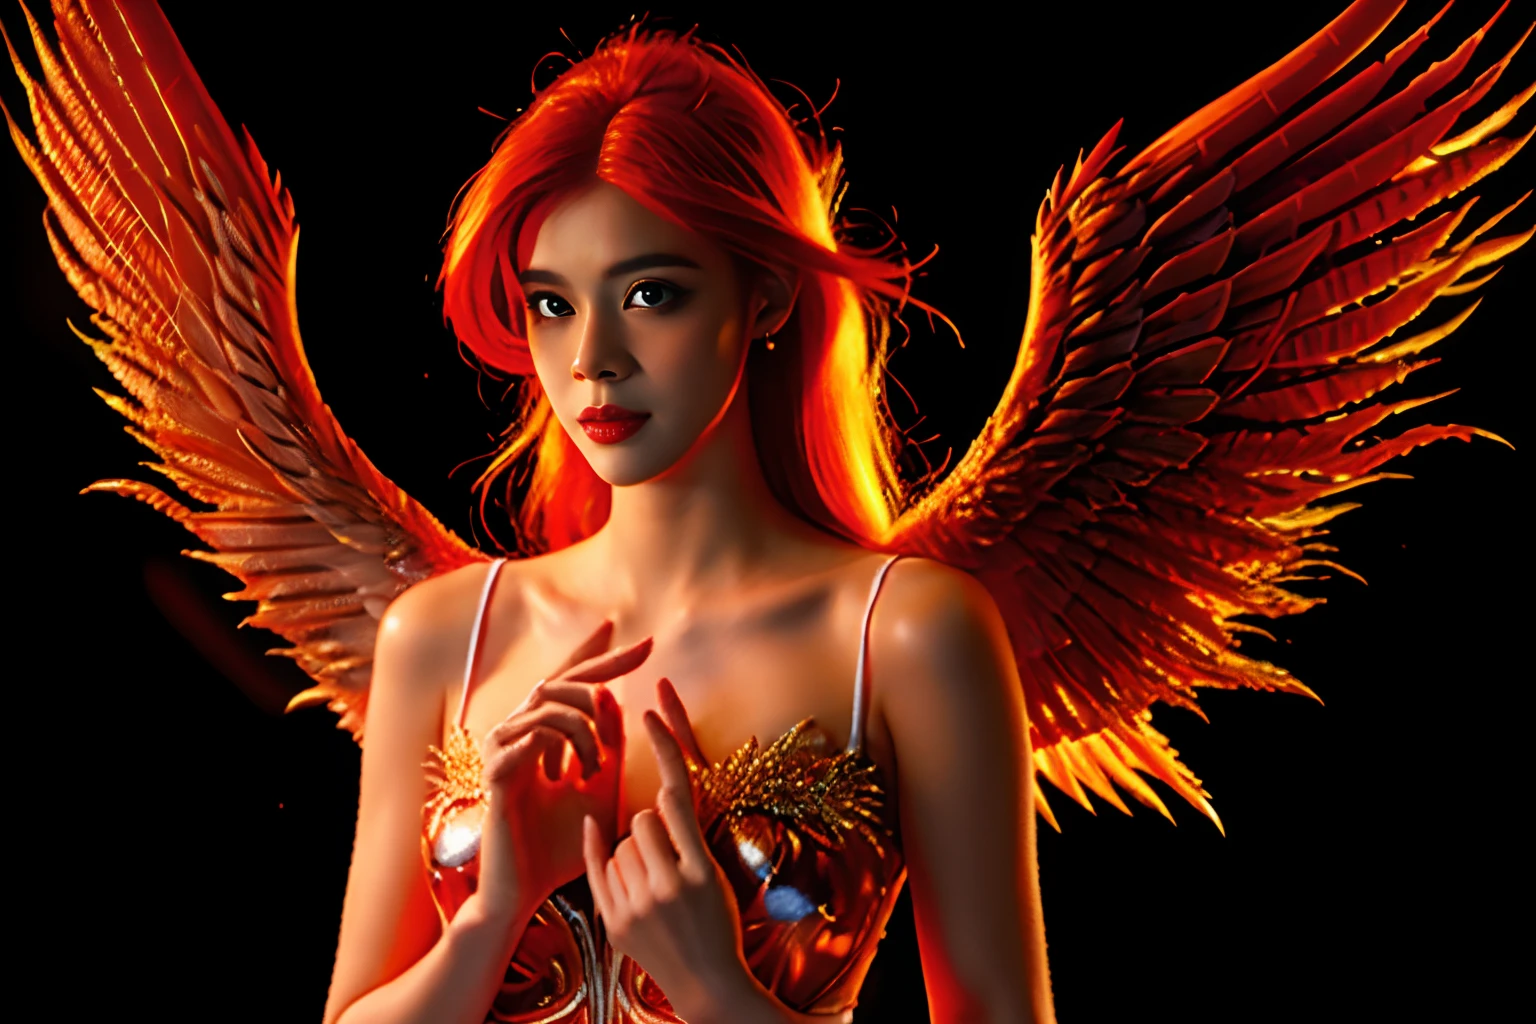 A beautiful angel, with red hair turning to fire, An angel woman, (((big breasts, An angel with wings of fire))), Transmits warmth and peace, wallpaper, 8k, intricate details, first work